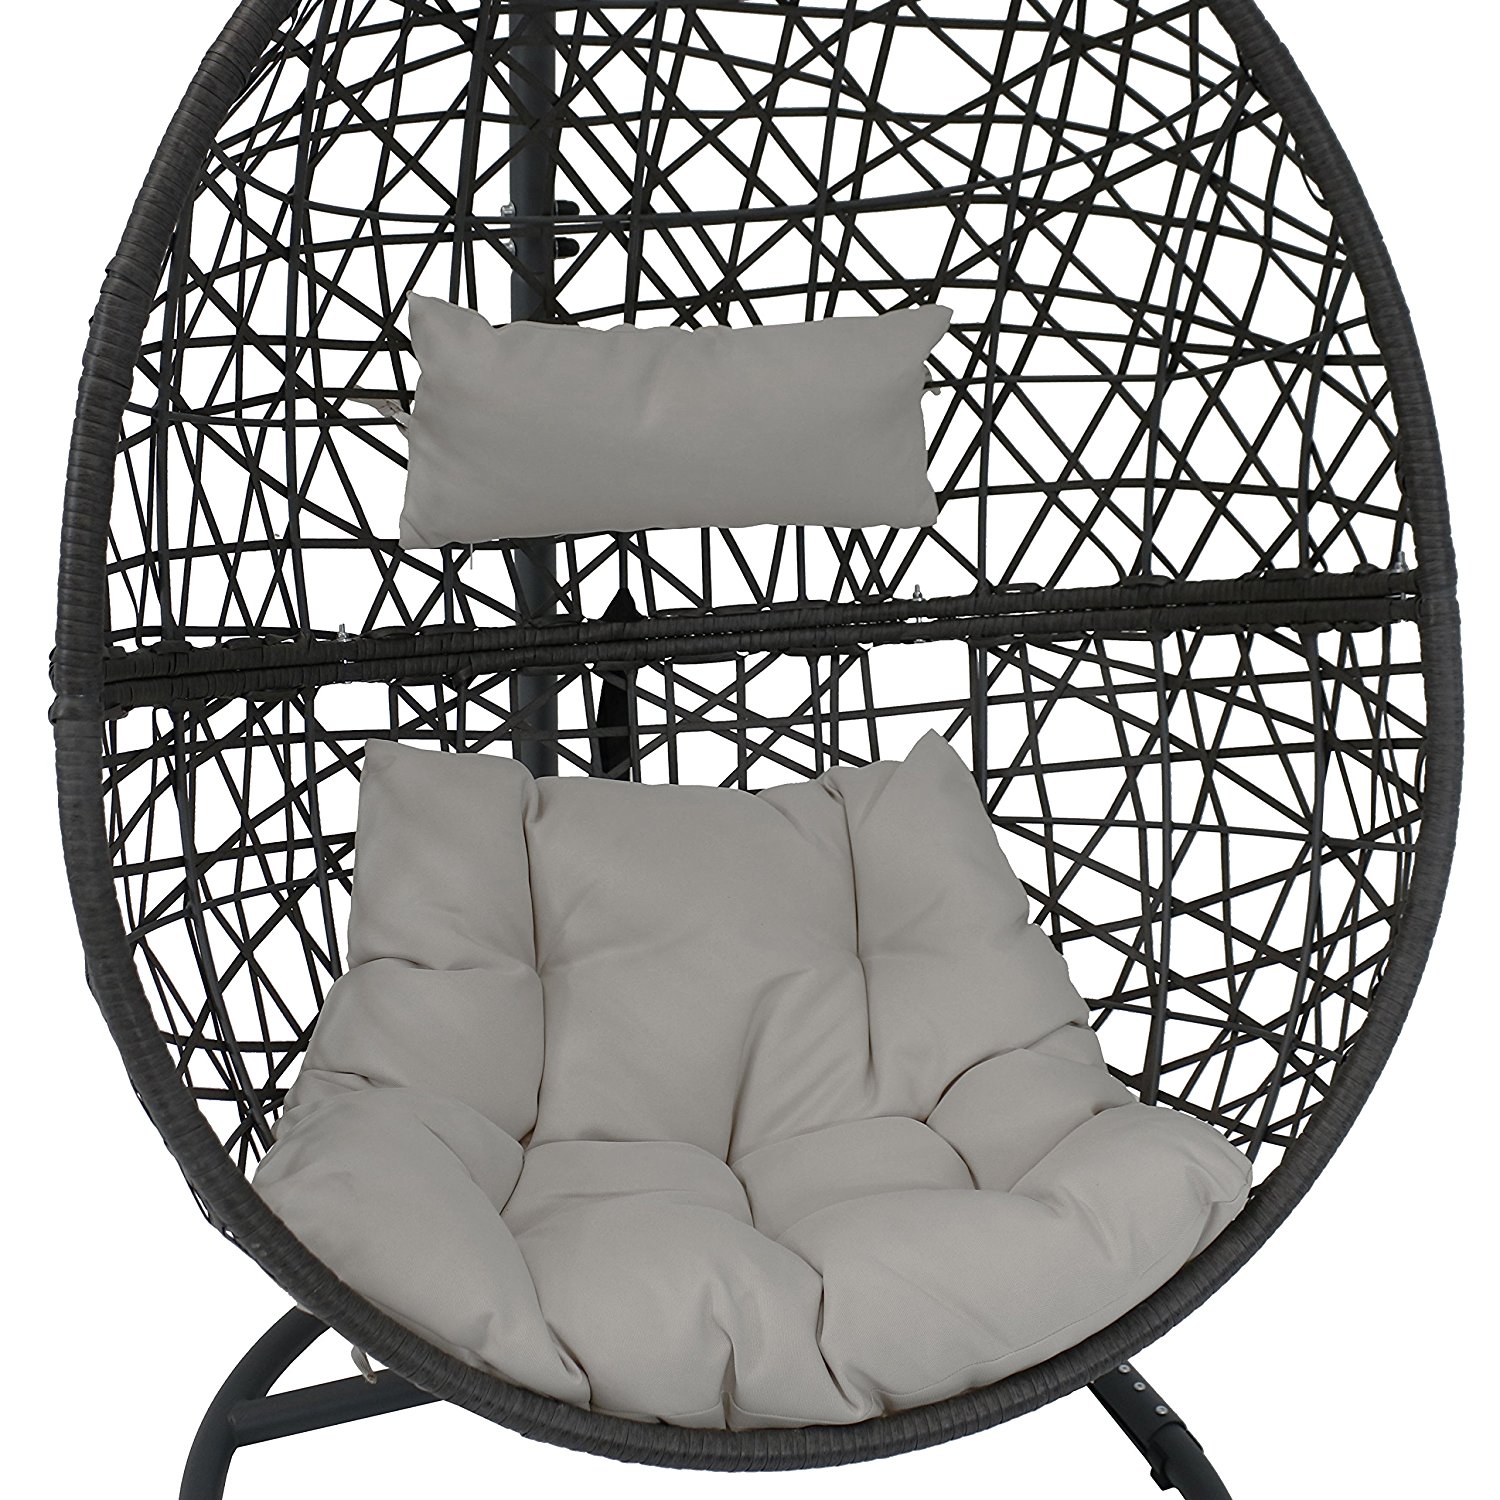 You Can Save $75 On This Cozy Hanging Chair | The Daily Caller